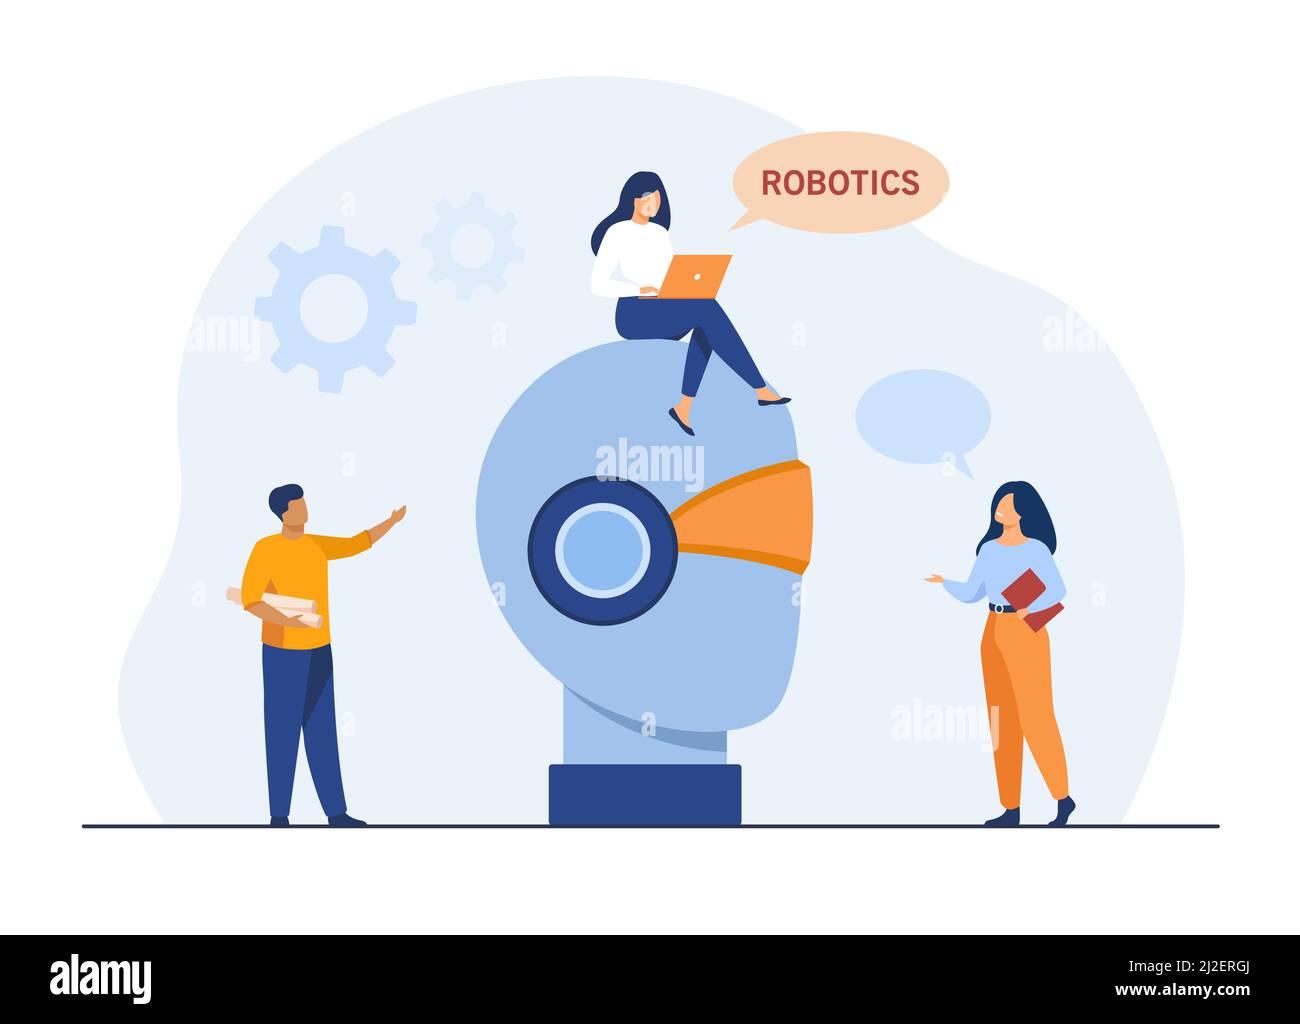 Tiny people and giant robot head. Laptop, development, computer flat vector illustration. Robotics and engineering concept for banner, website design Stock Vector